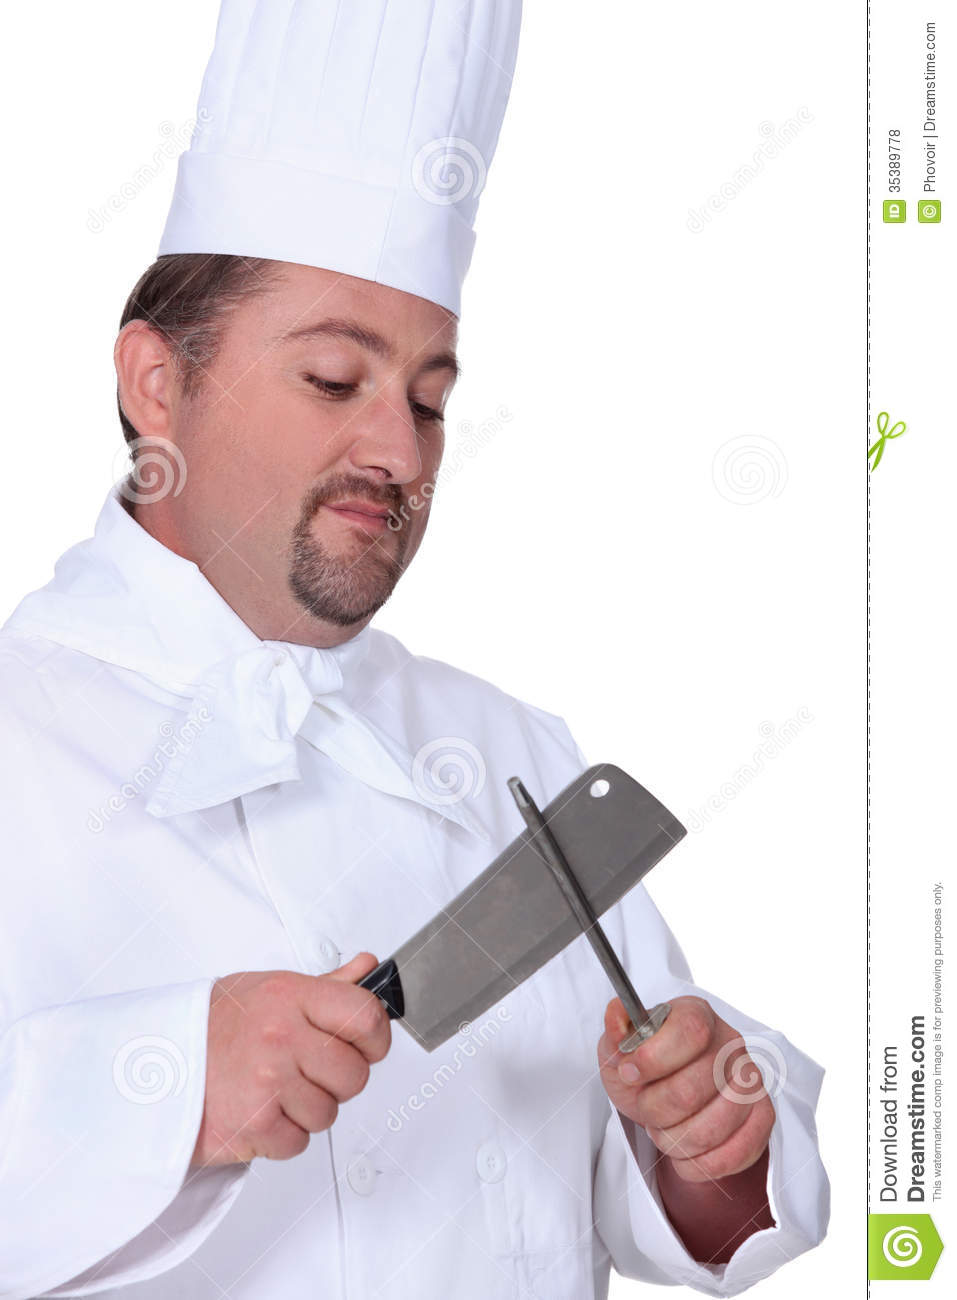 Chef Sharpening Meat Cleaver Royalty Free Stock Photos   Image    